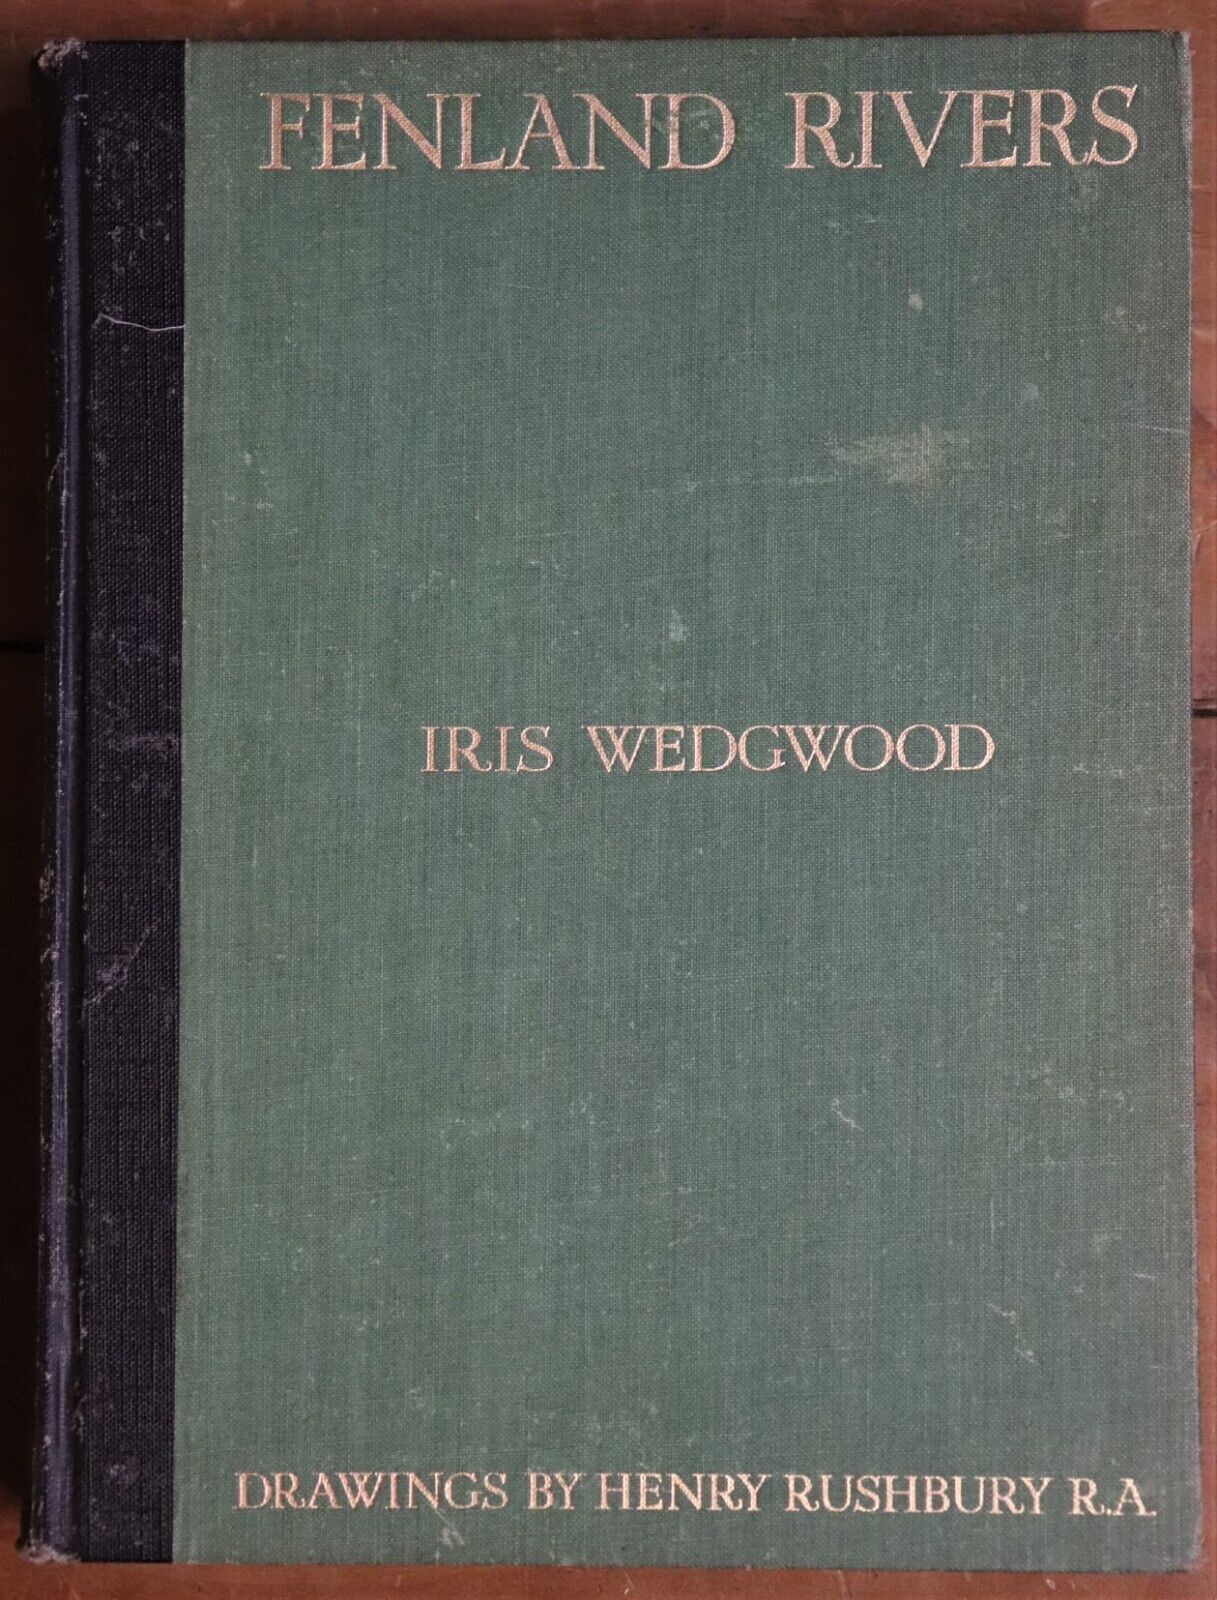 Fenland Rivers by Iris Wedgwood - 1936 - Antique Book 1st Edition